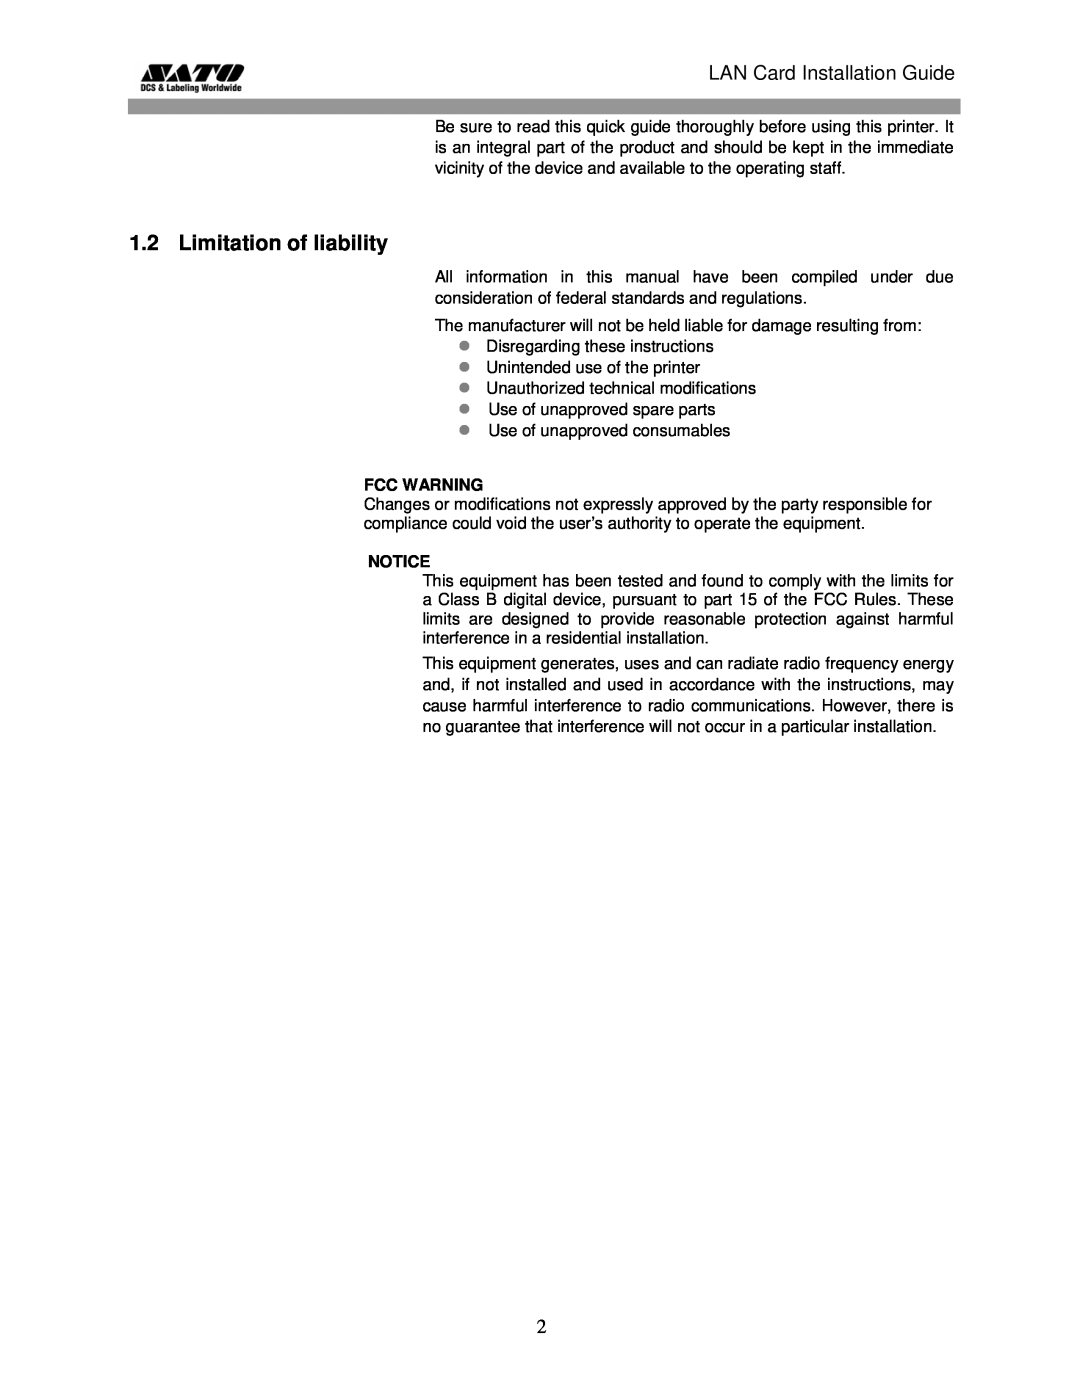 SATO GL 4xxe Series manual Limitation of liability, LAN Card Installation Guide, Fcc Warning 